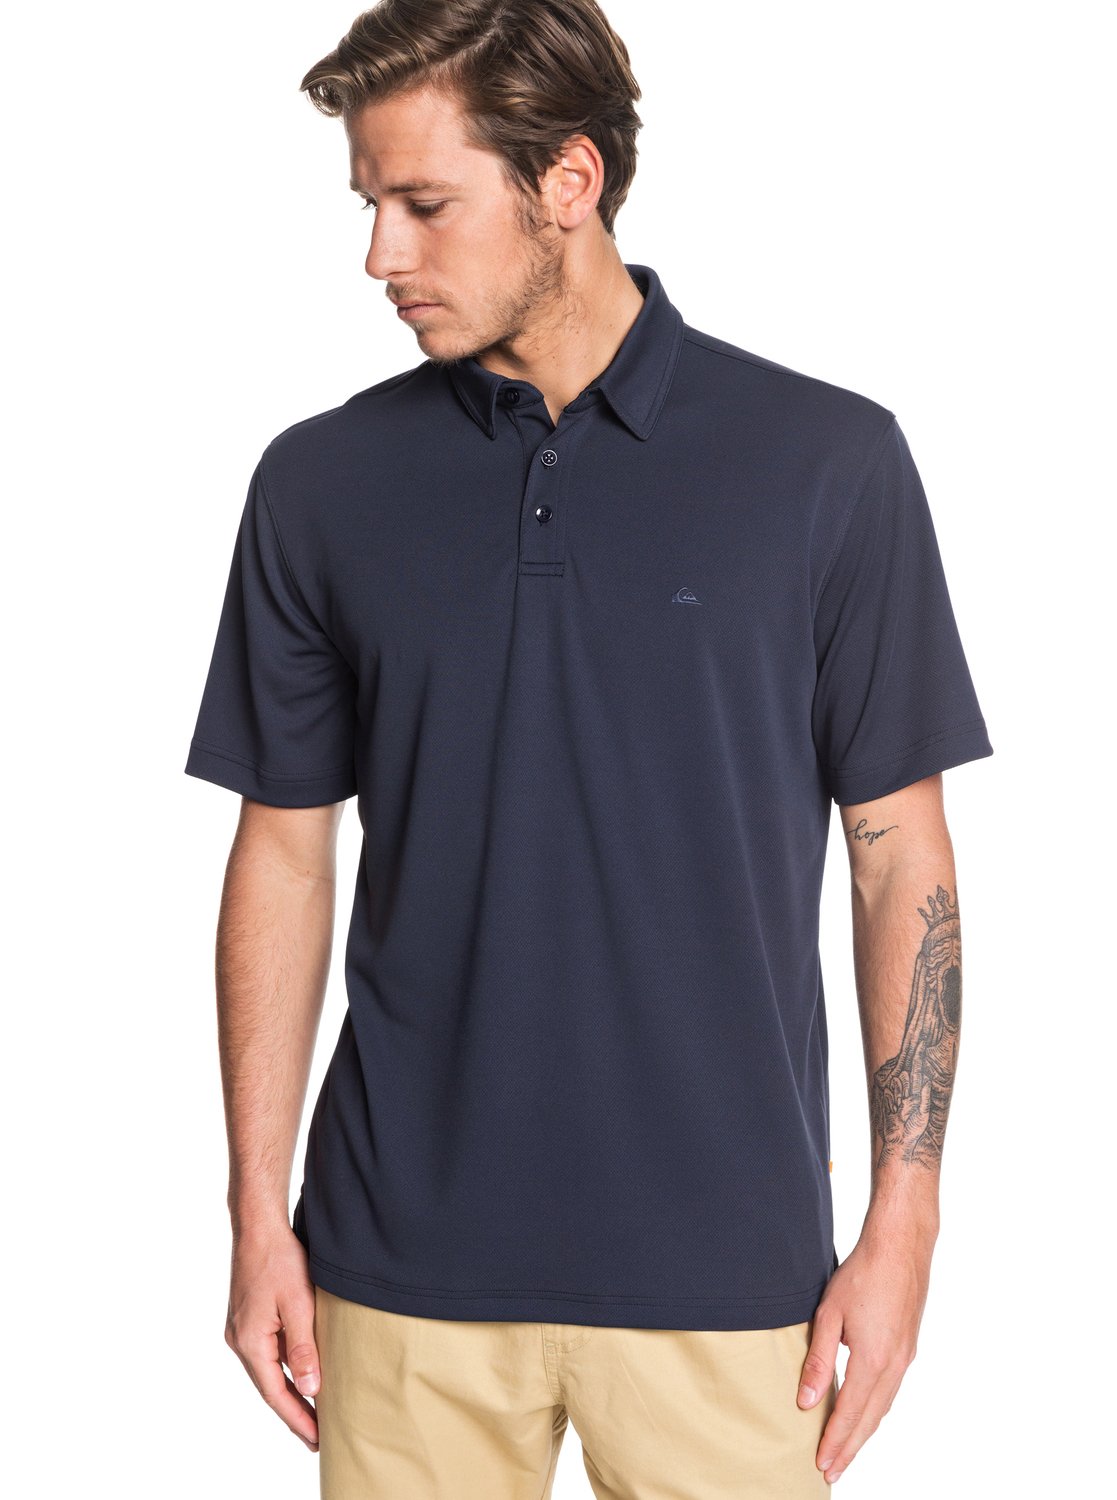 Quiksilver Waterman Water 2 Polo BYP0 XL